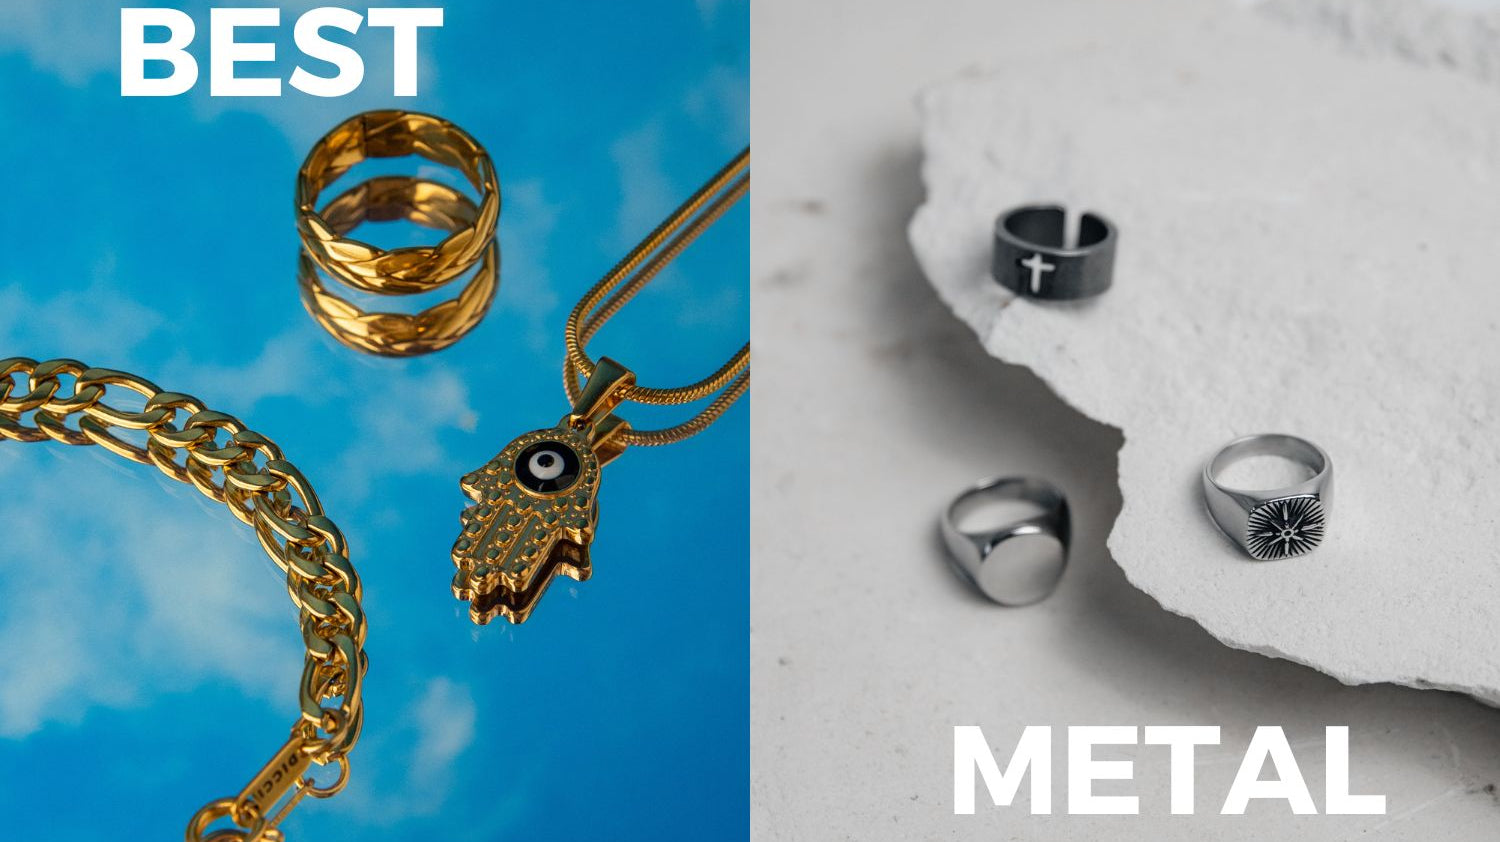 WHAT IS THE BEST METAL TO USE IN JEWELRY?